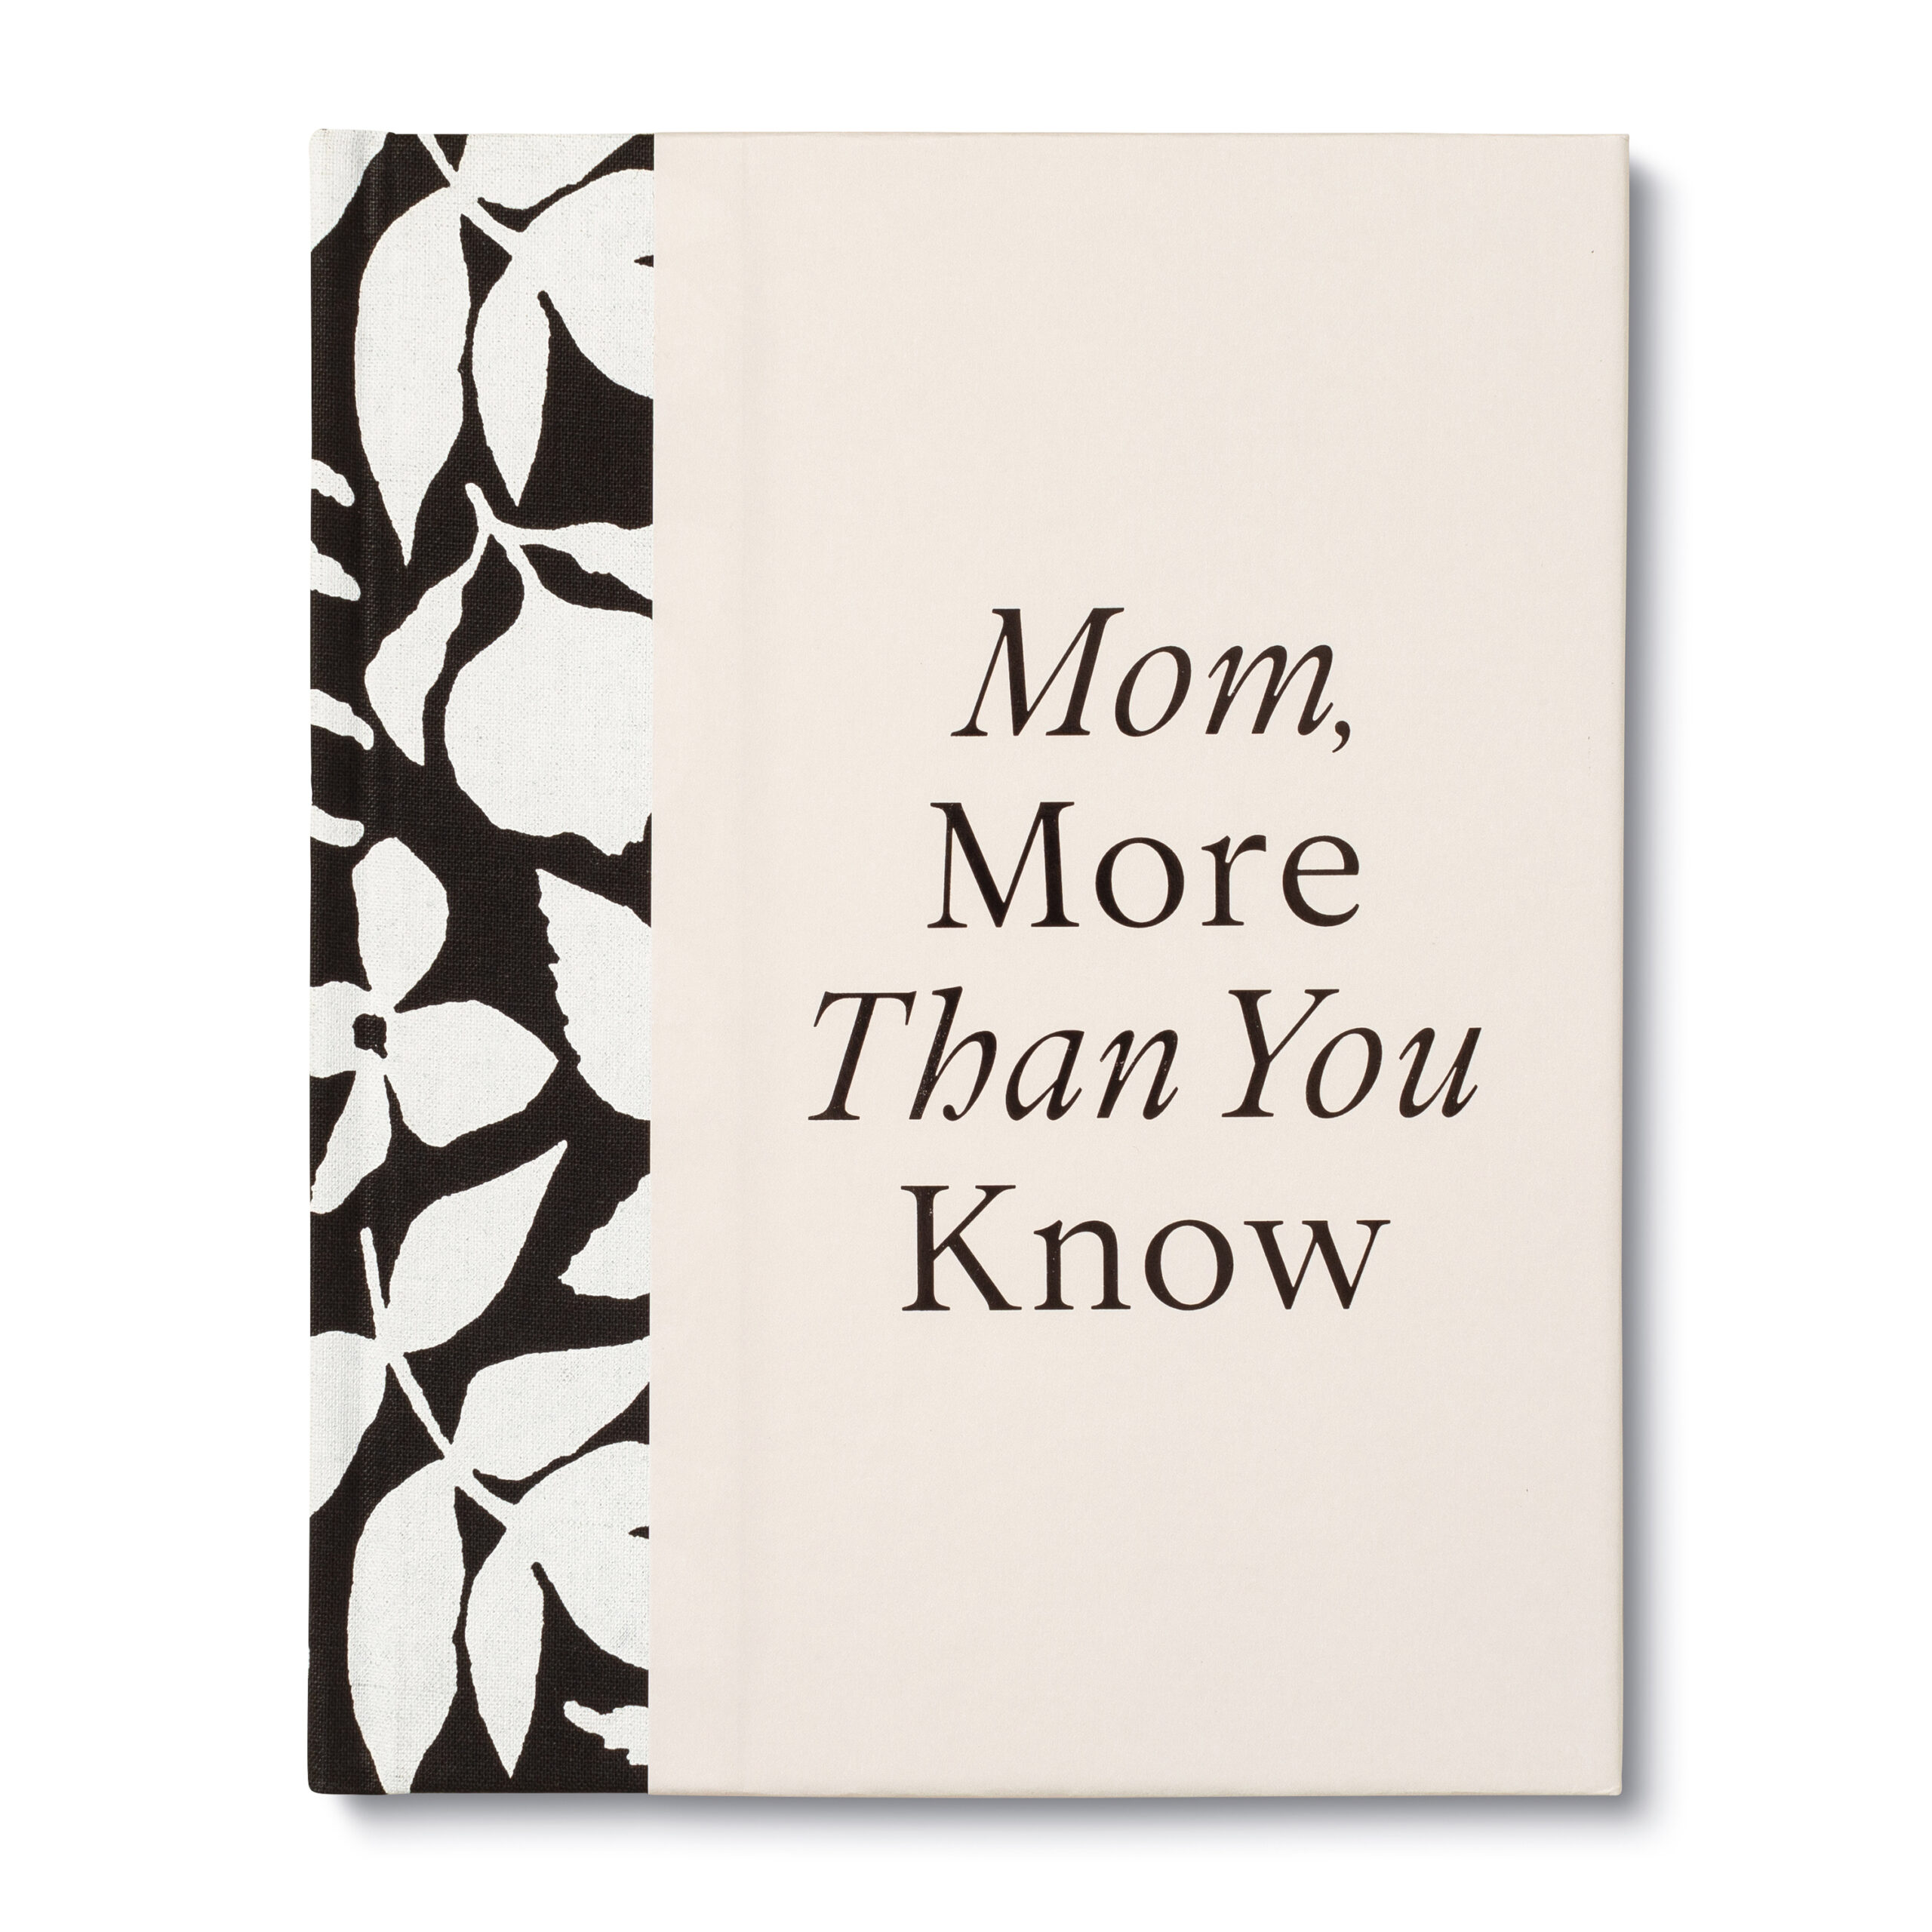 Mom, More Than You Know 
															/ Compendium							